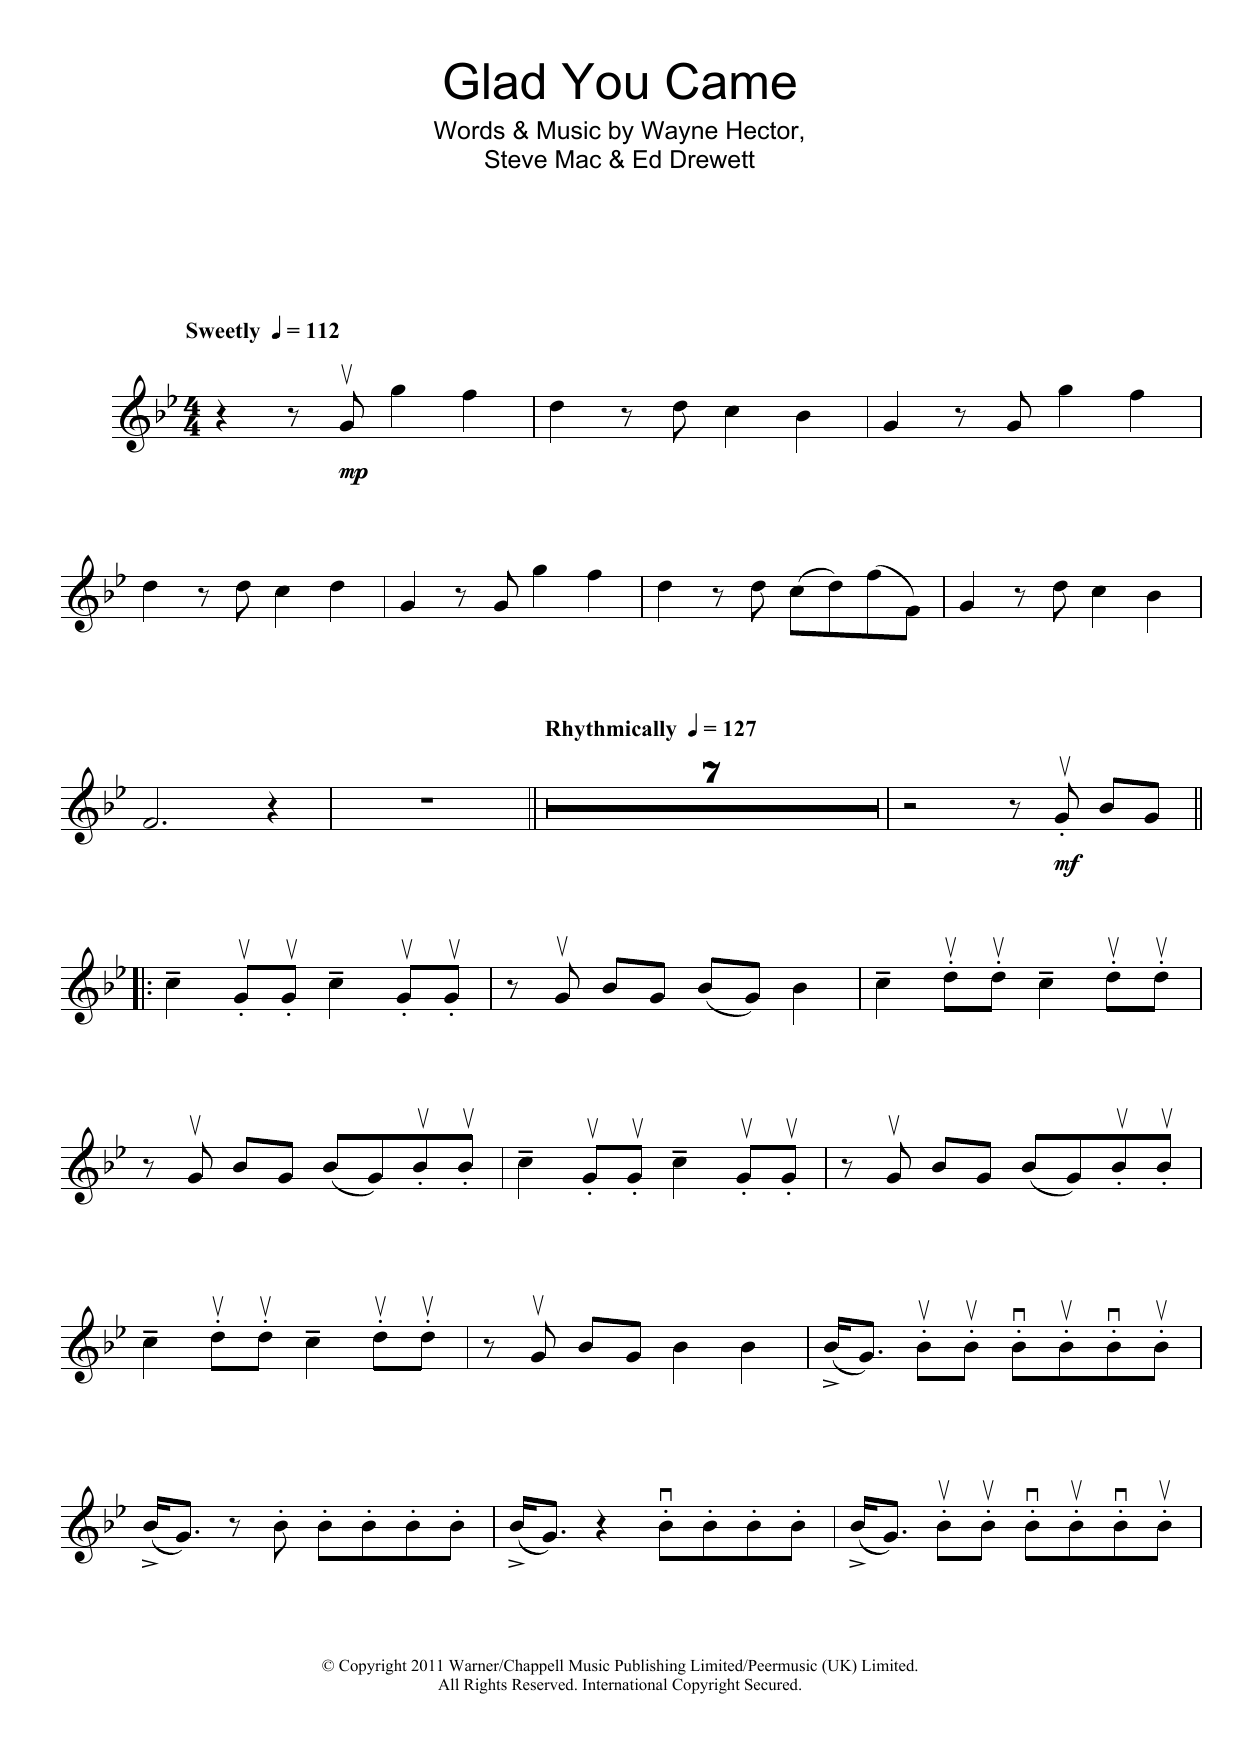 Download The Wanted Glad You Came Sheet Music